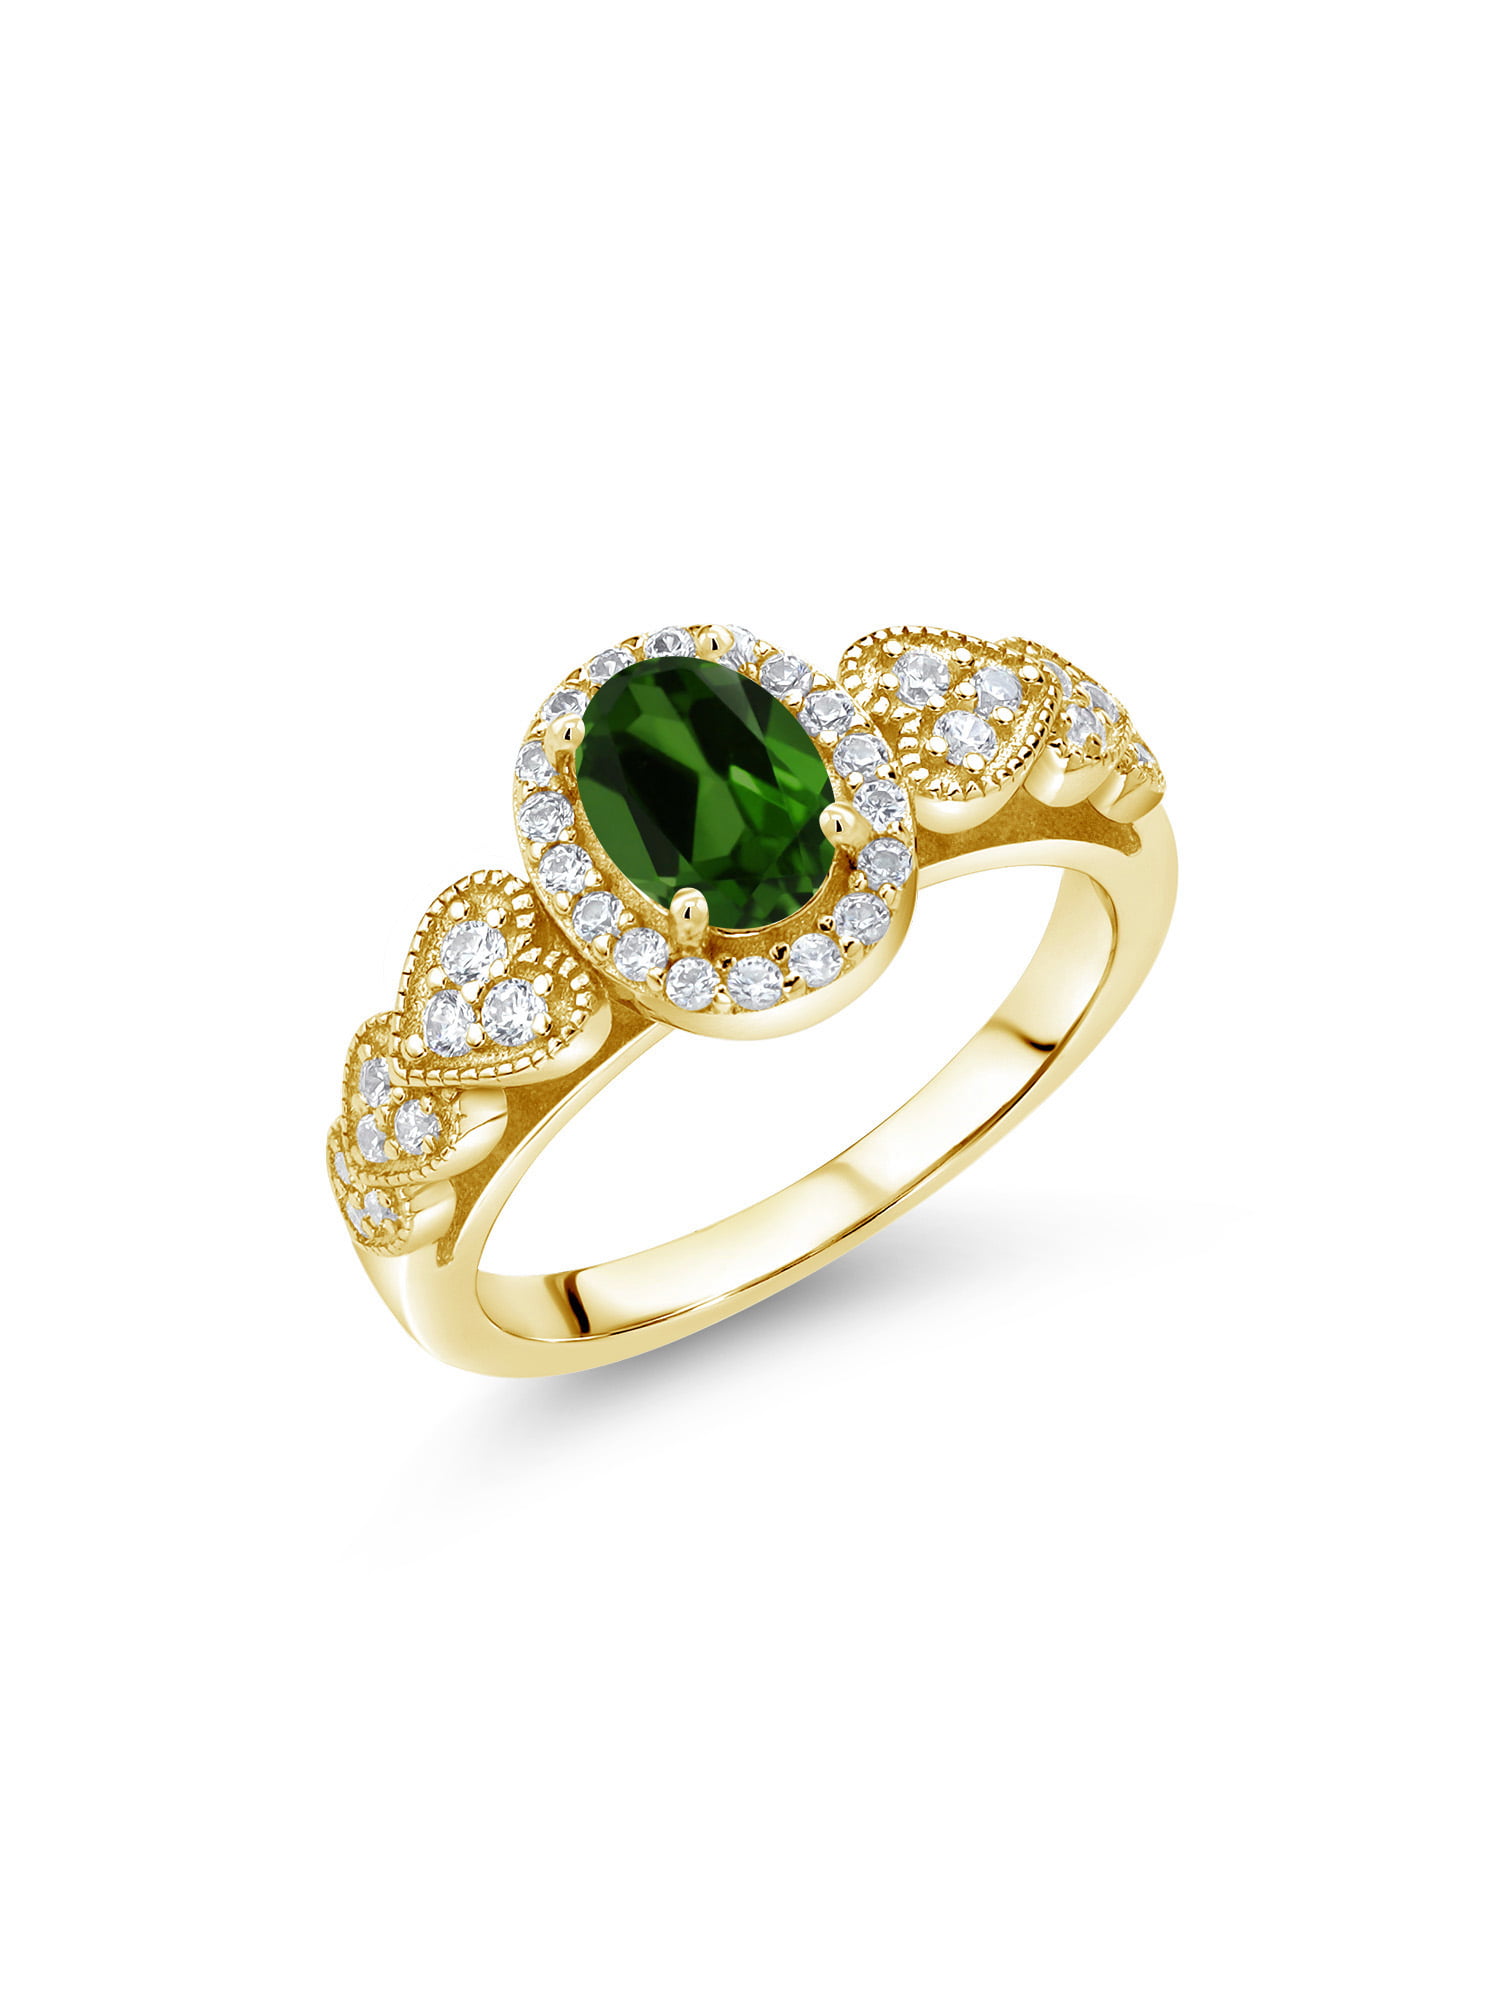 Anniversary Gift. Handmade ring for Men And Woman Green Emerald 6.10 Carat Ring 925 Sterling Silver